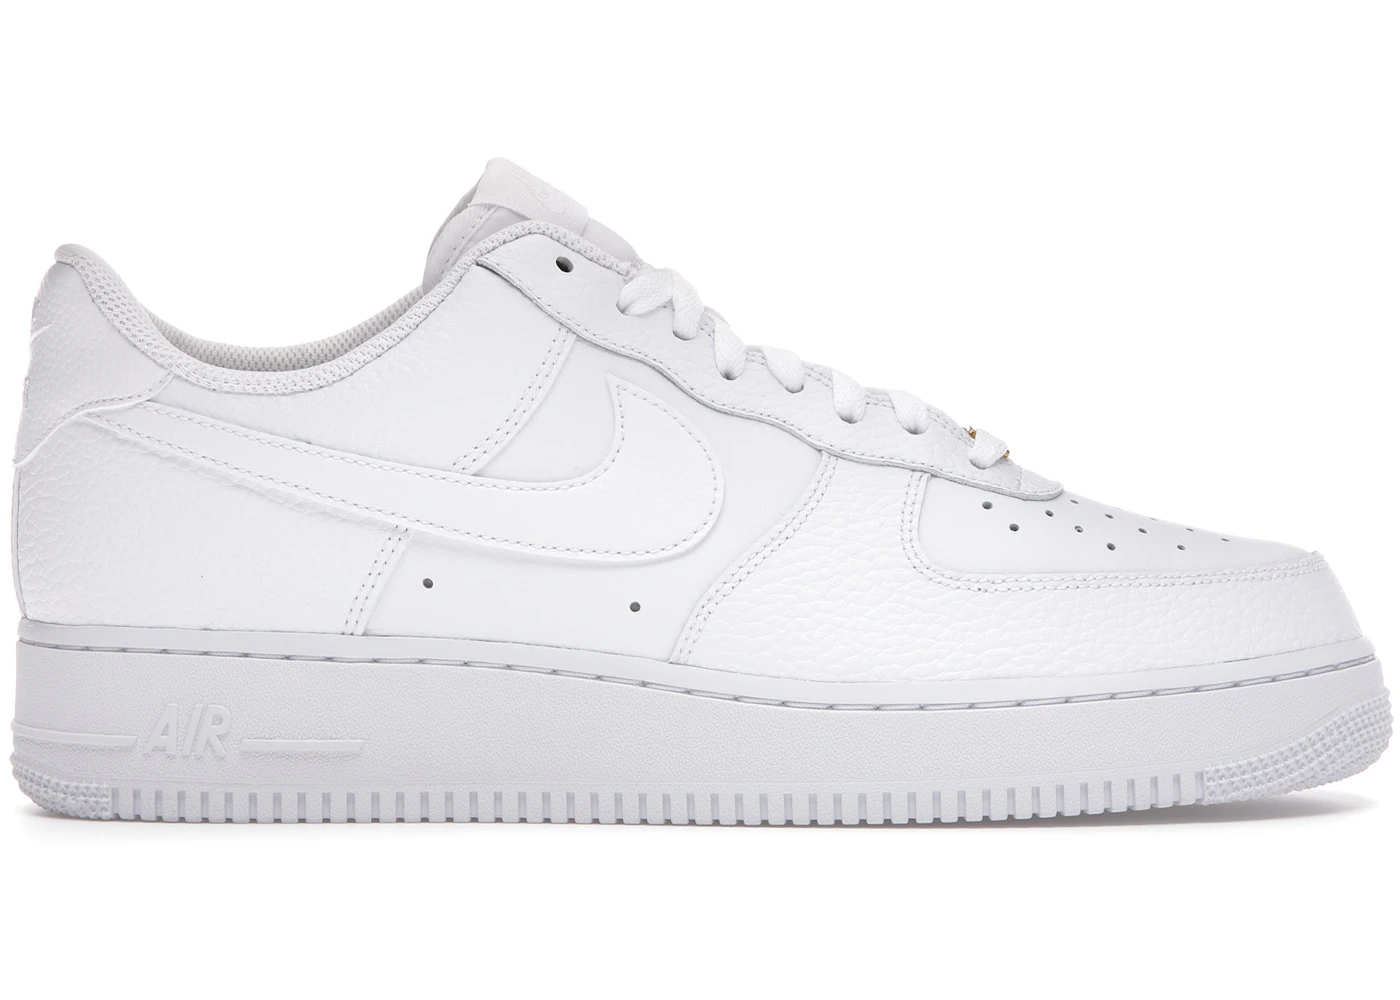 Air Force 1 Low Triple White Leather Men's - US